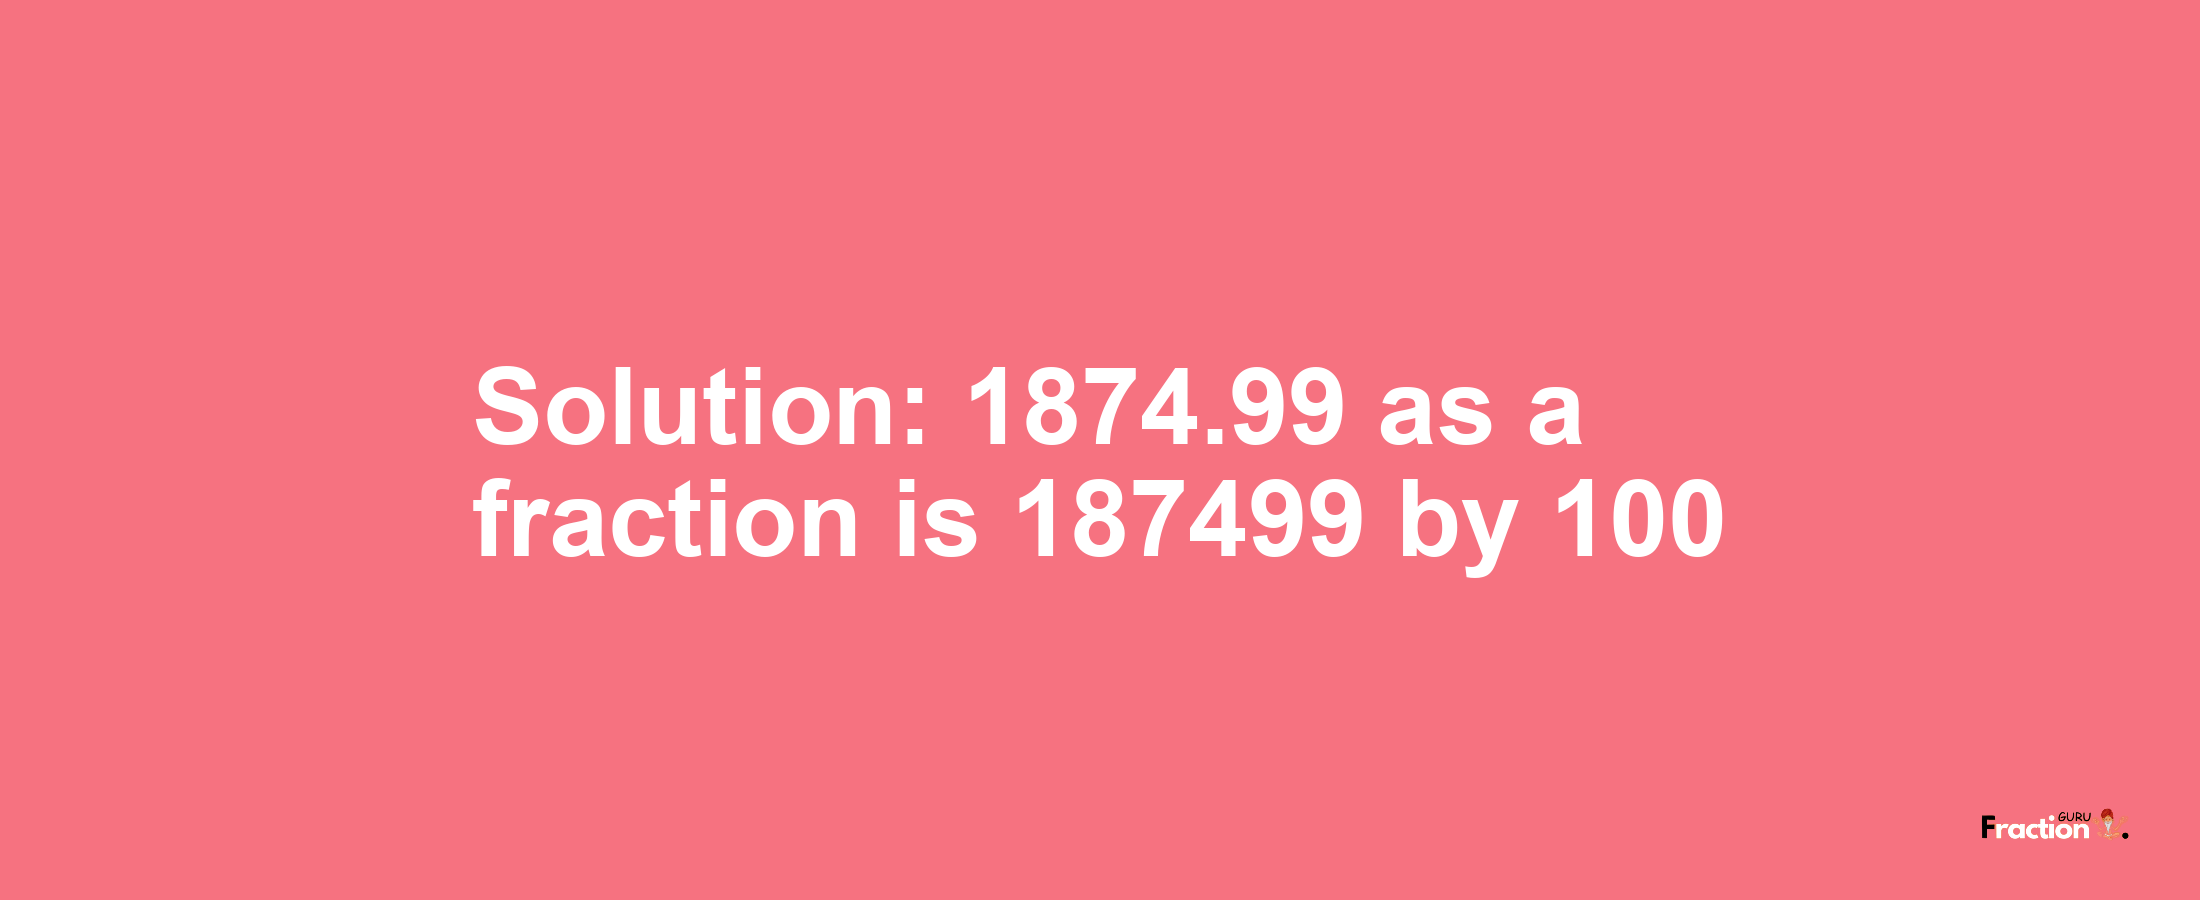 Solution:1874.99 as a fraction is 187499/100